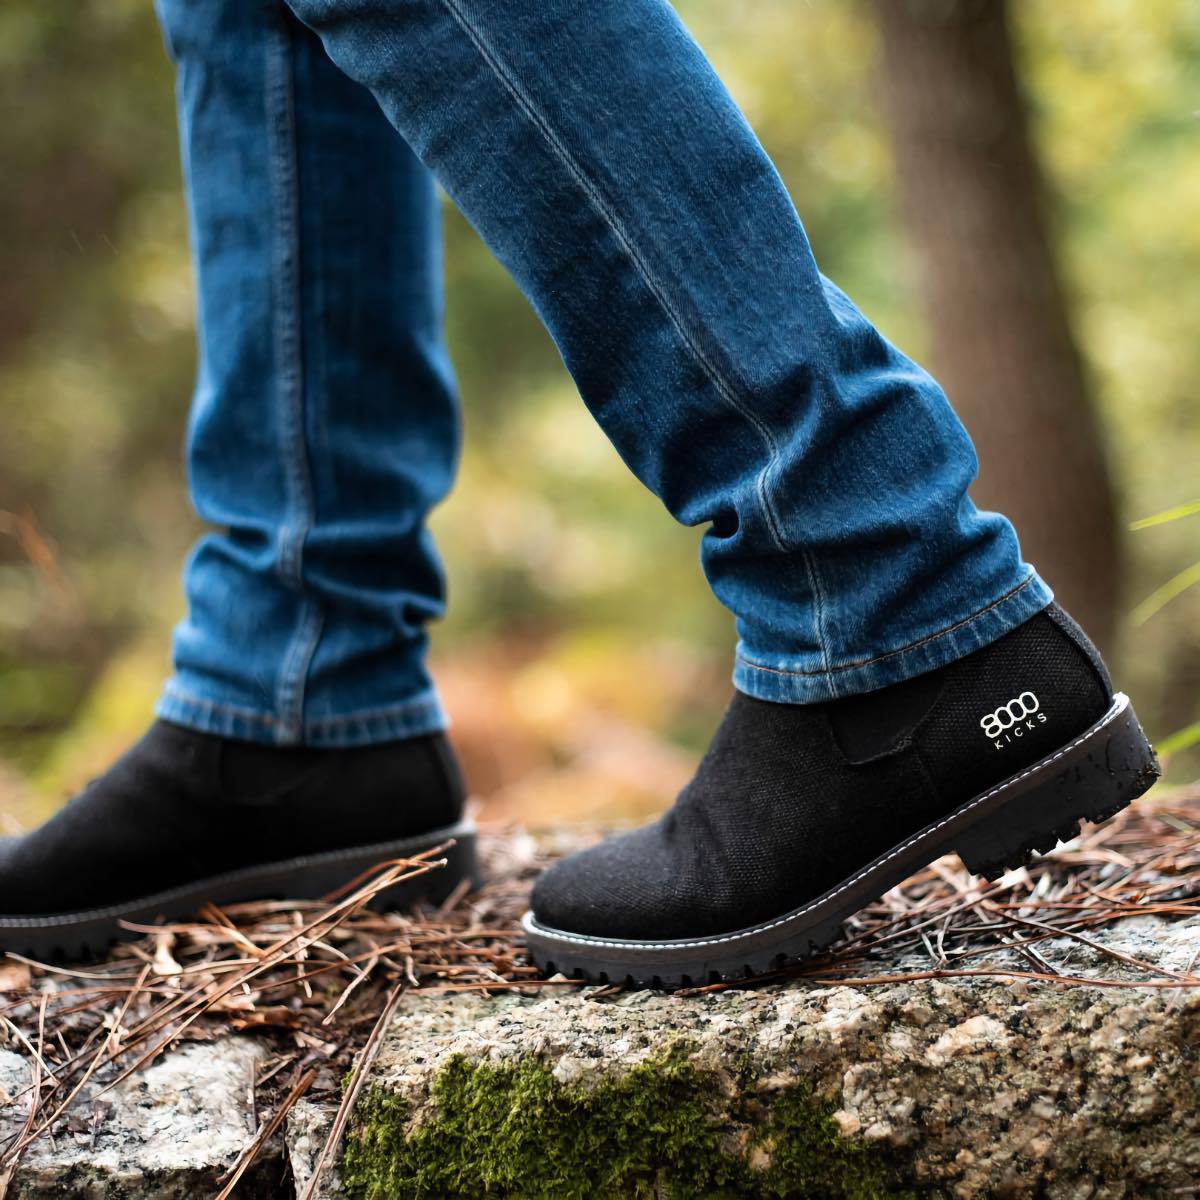 Guide to Vegan Boots: Winter Boots, Cowboy Boots, Uggs, Dr. Marten’s, and More